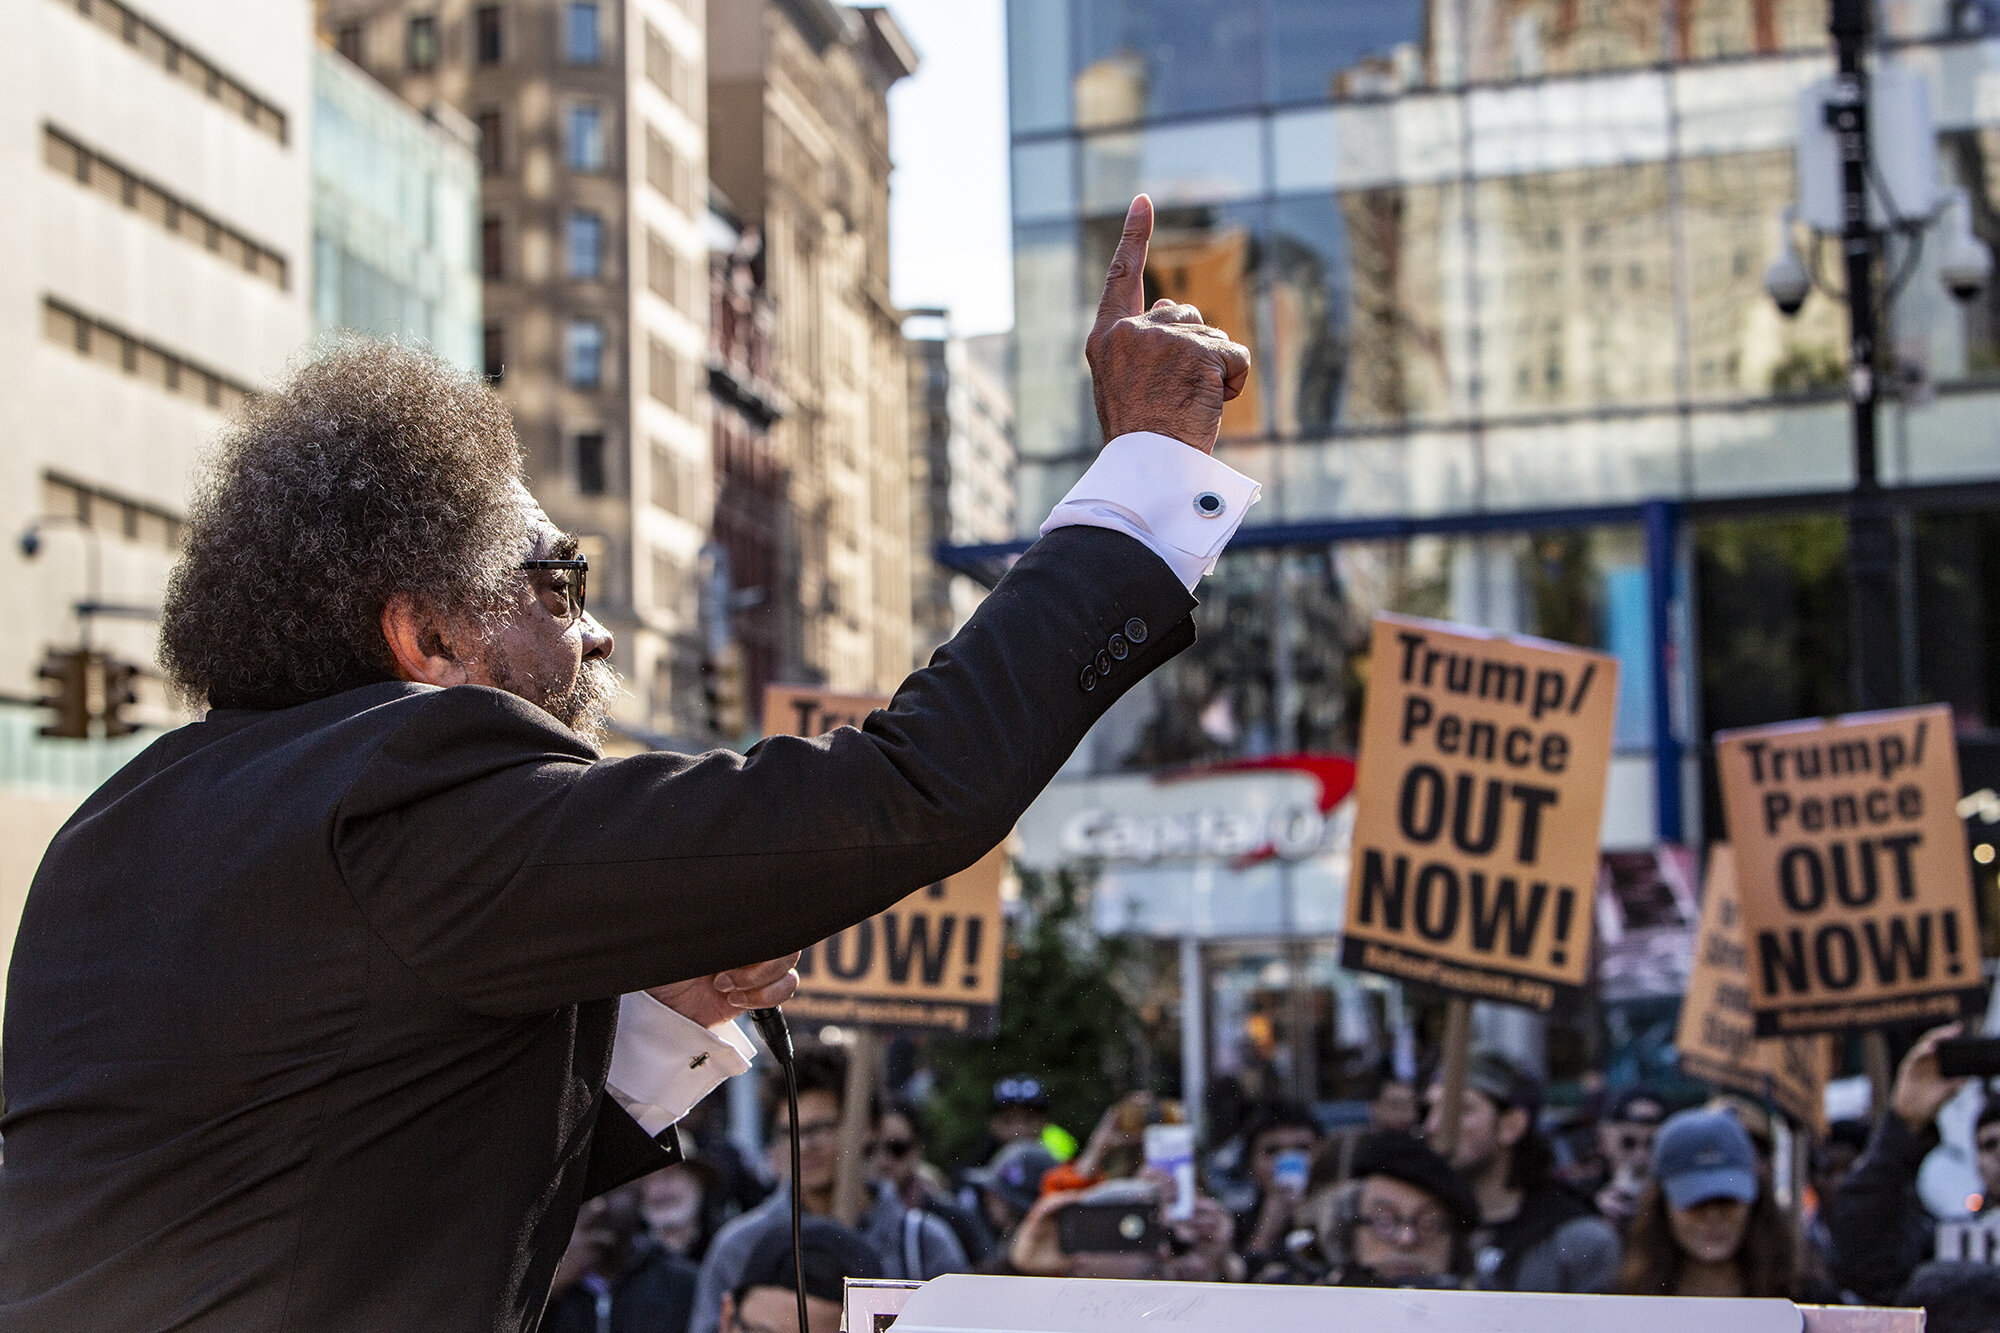 OUTNOW_Protest_2019_NYC-0358.jpg